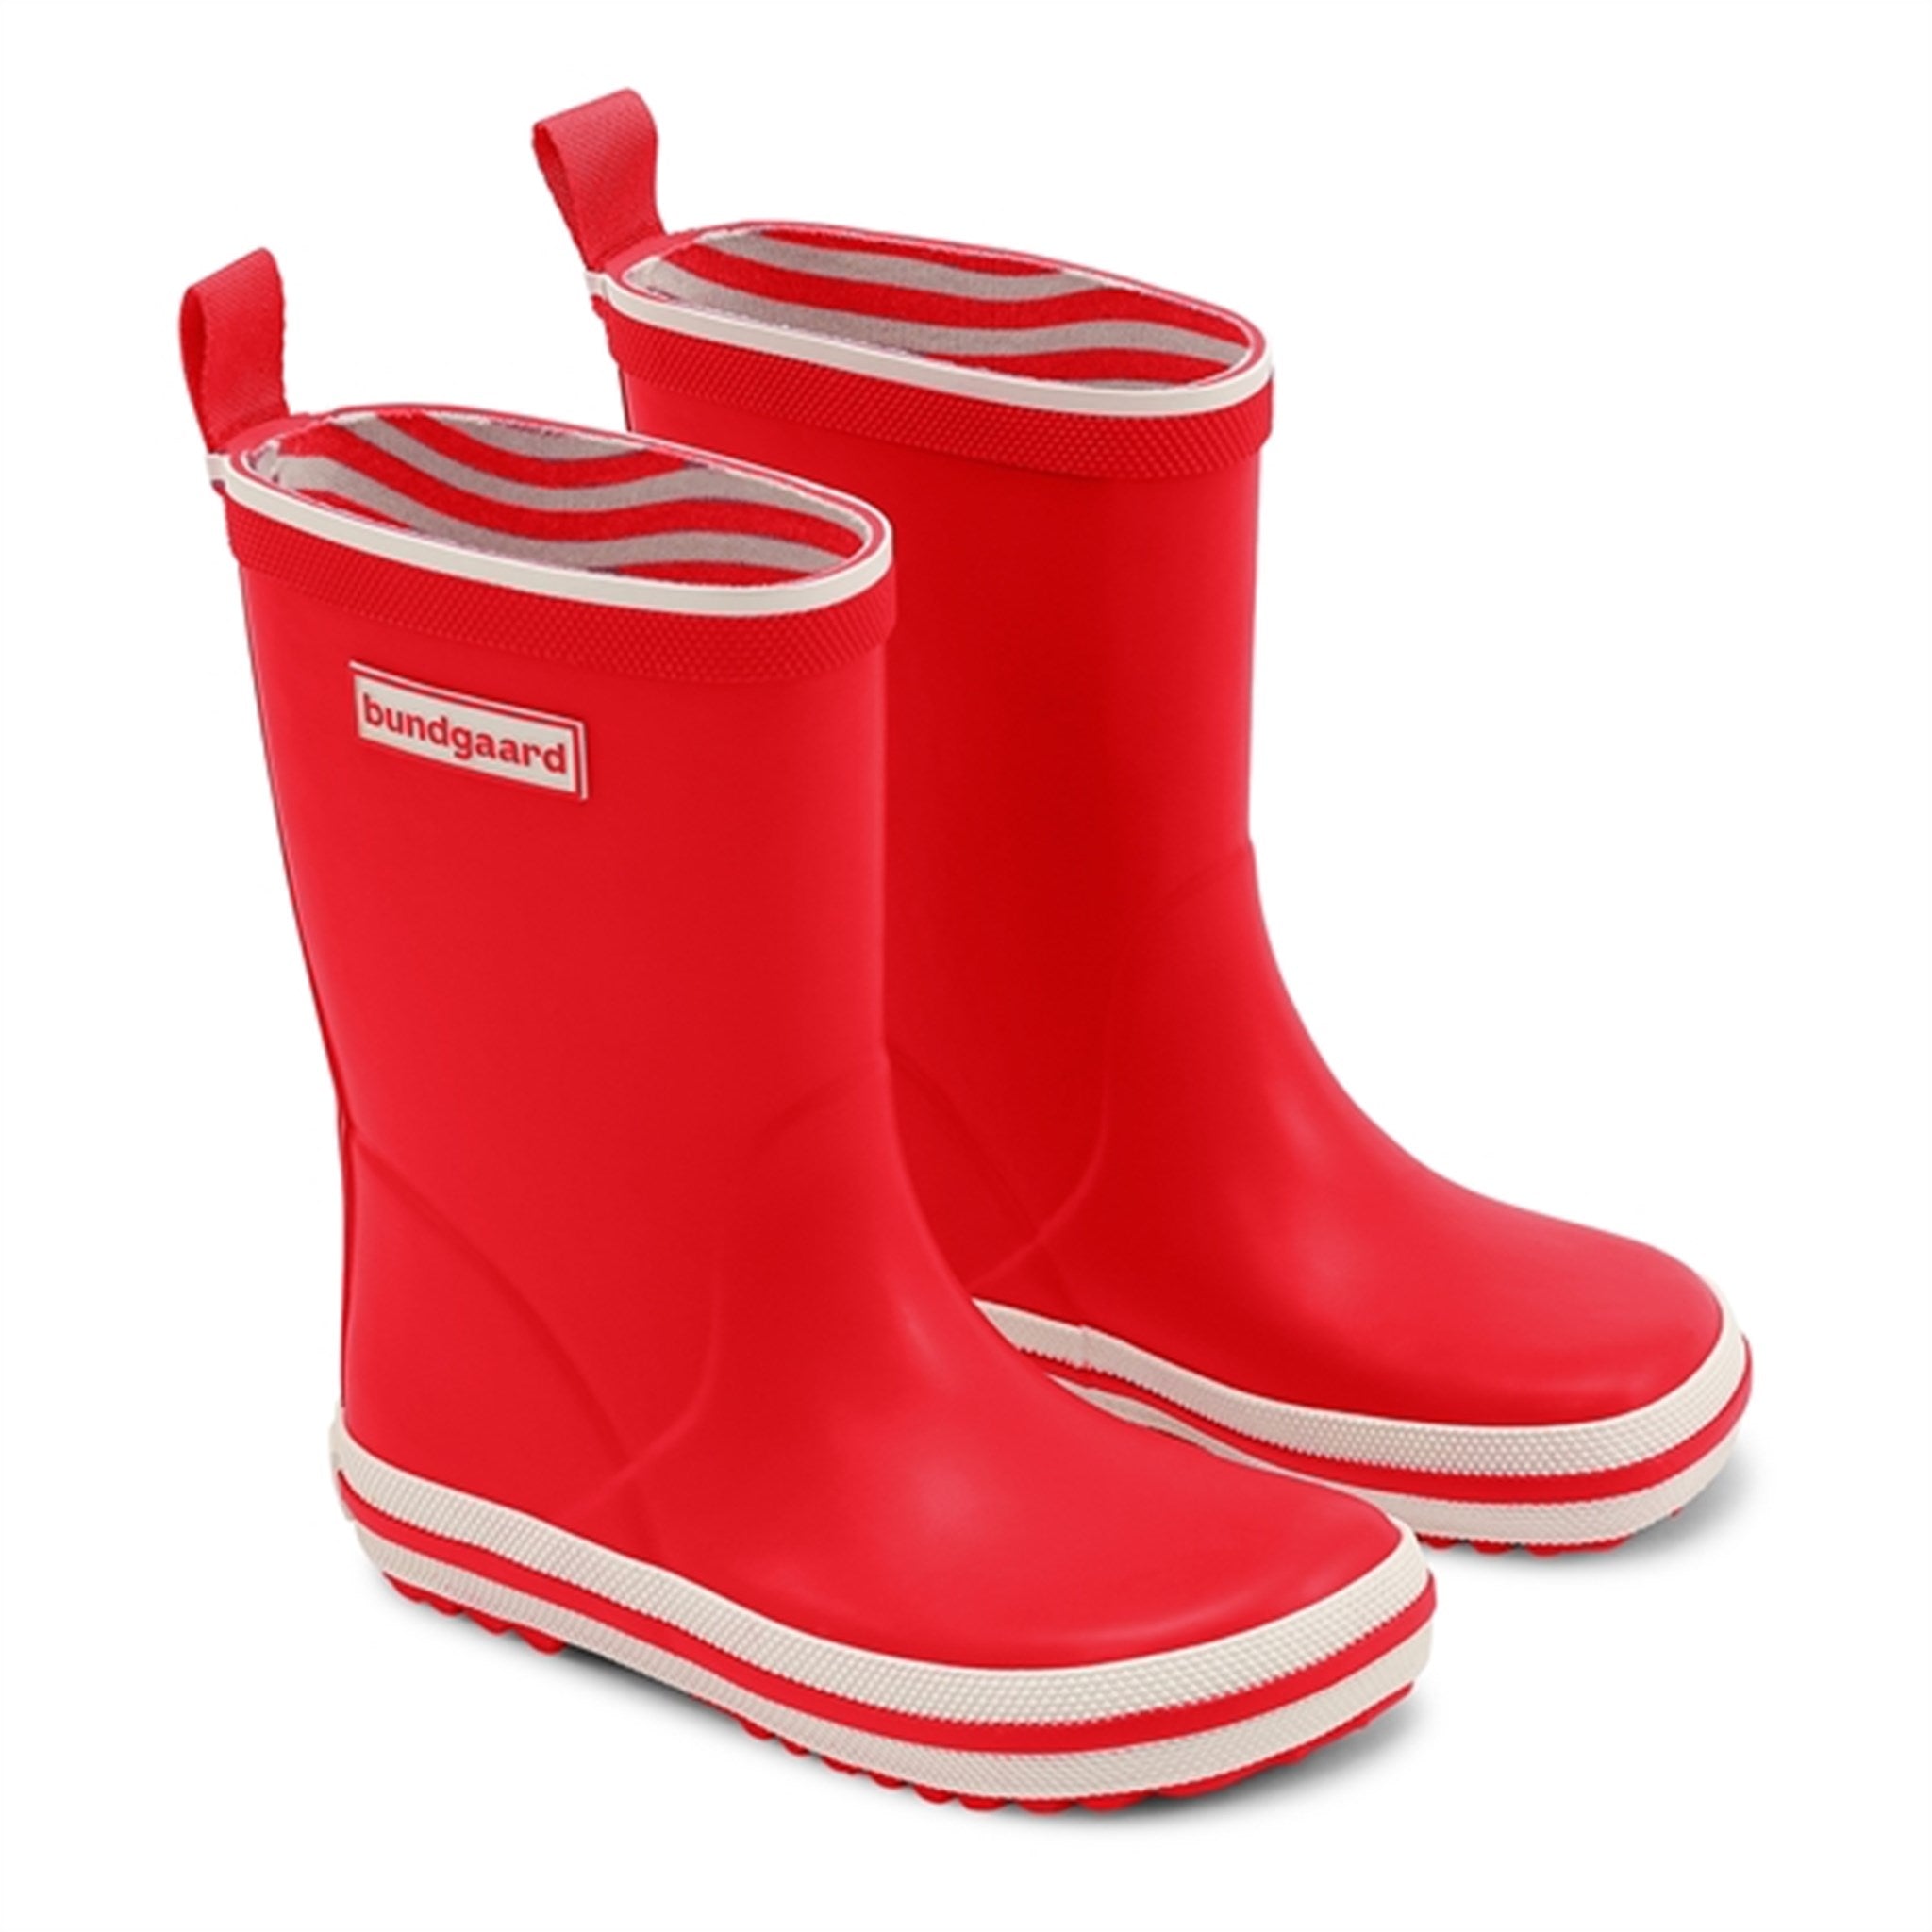 Bundgaard Charly High Rubber Boot Red